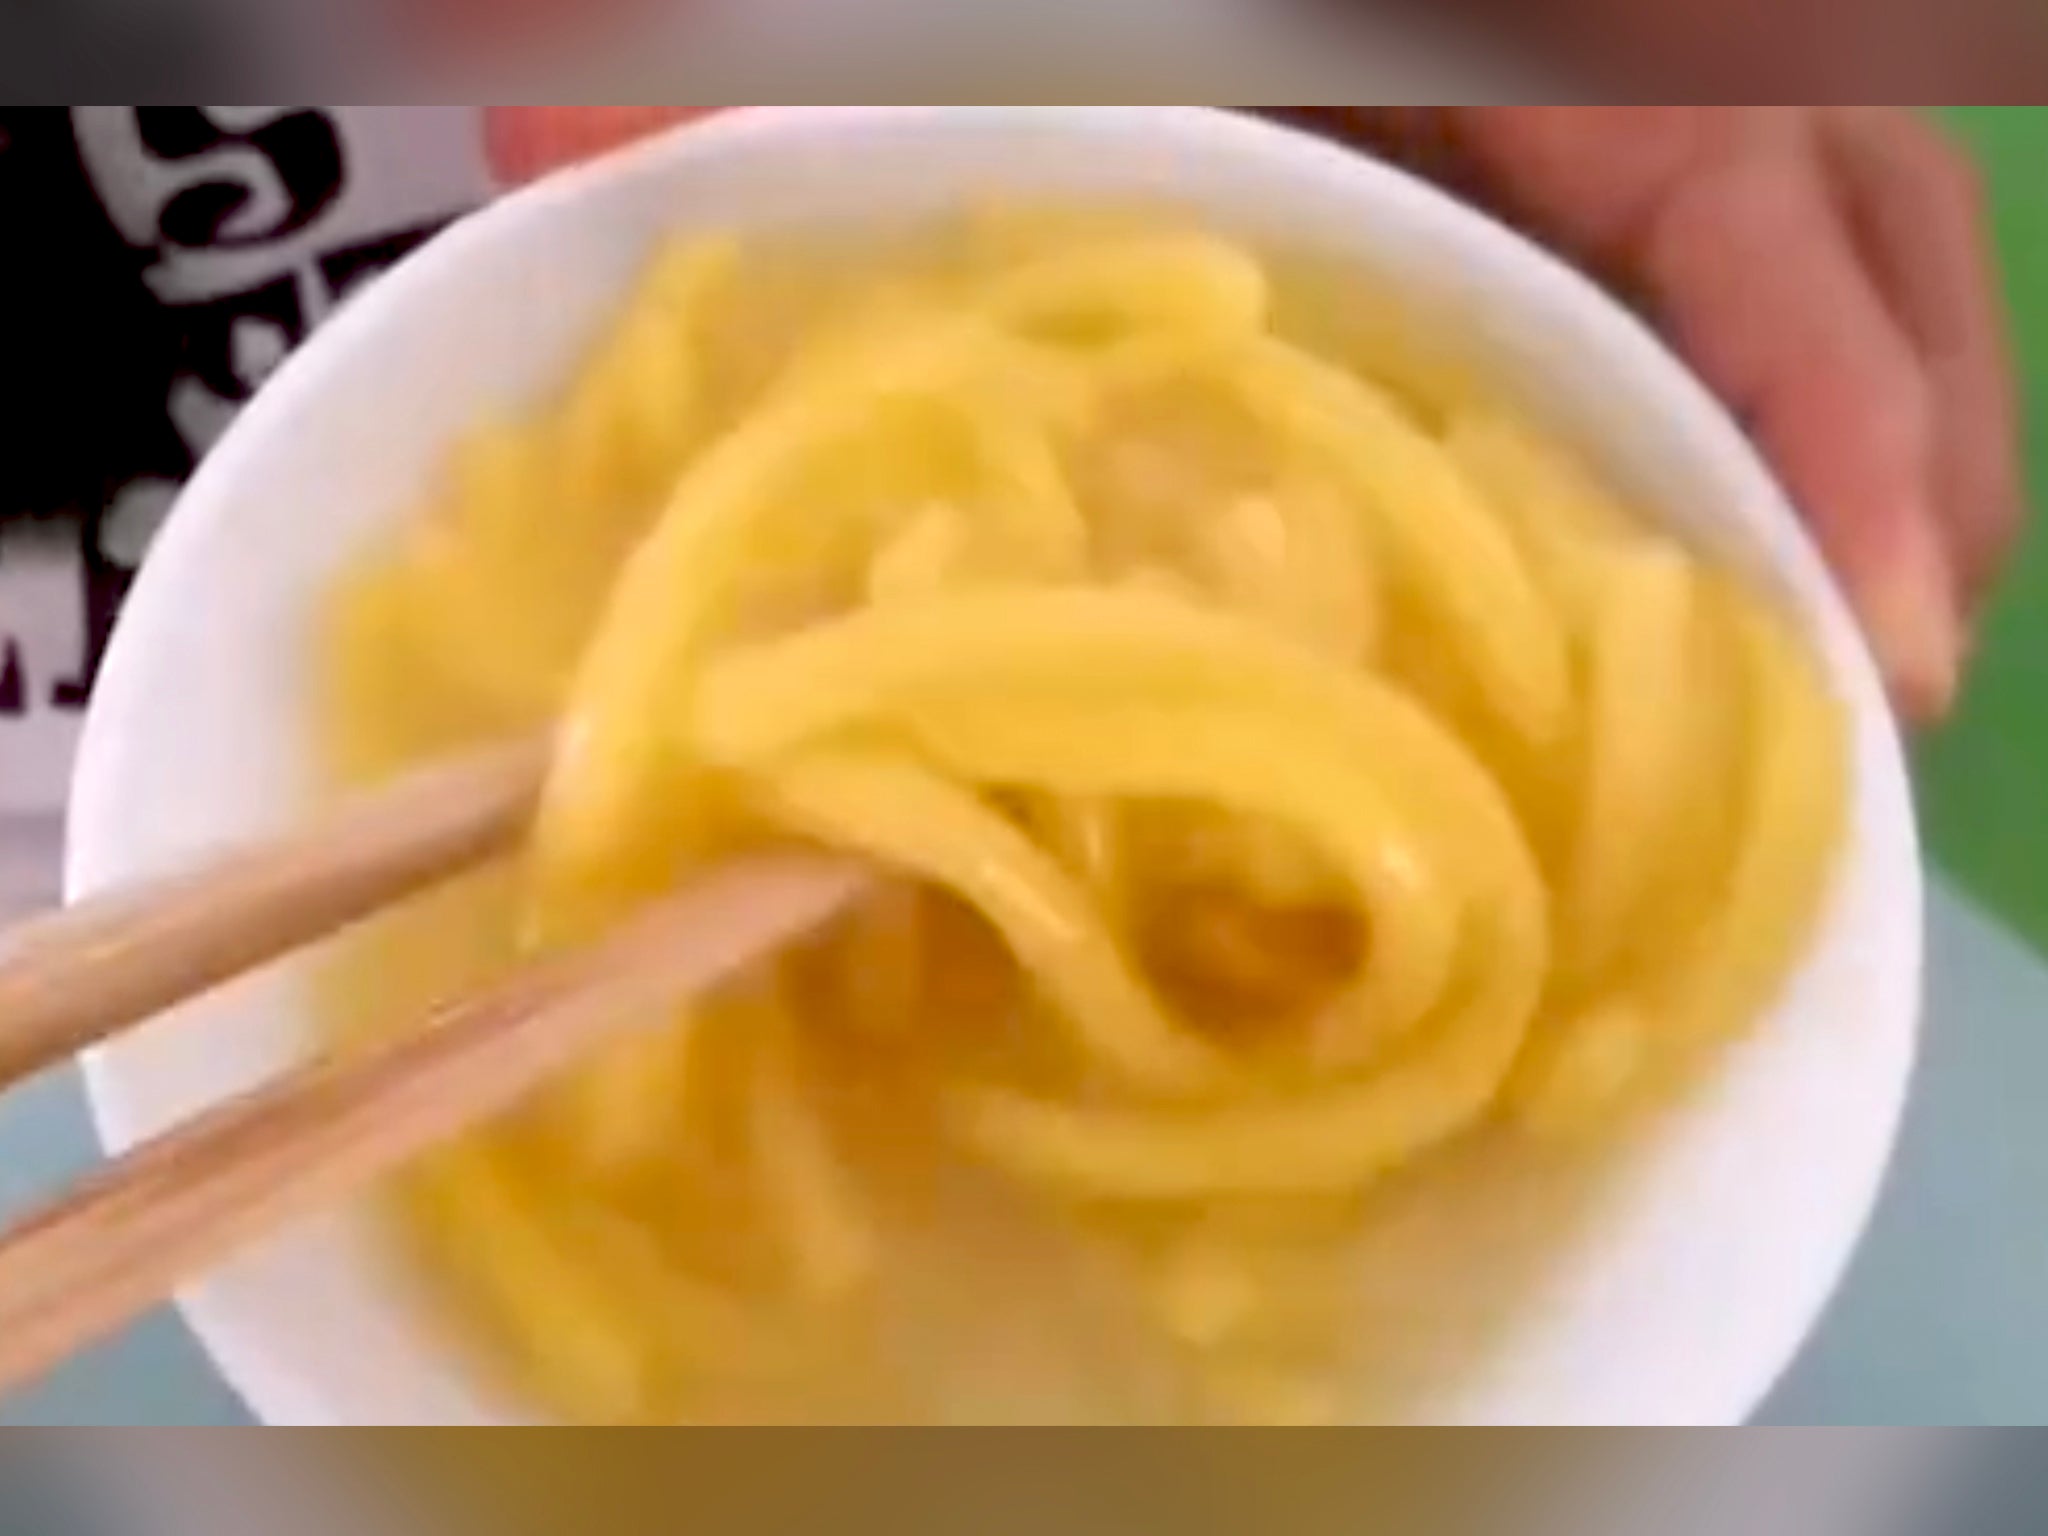 Suantangzi is a thick type of noodle made from fermented corn flour